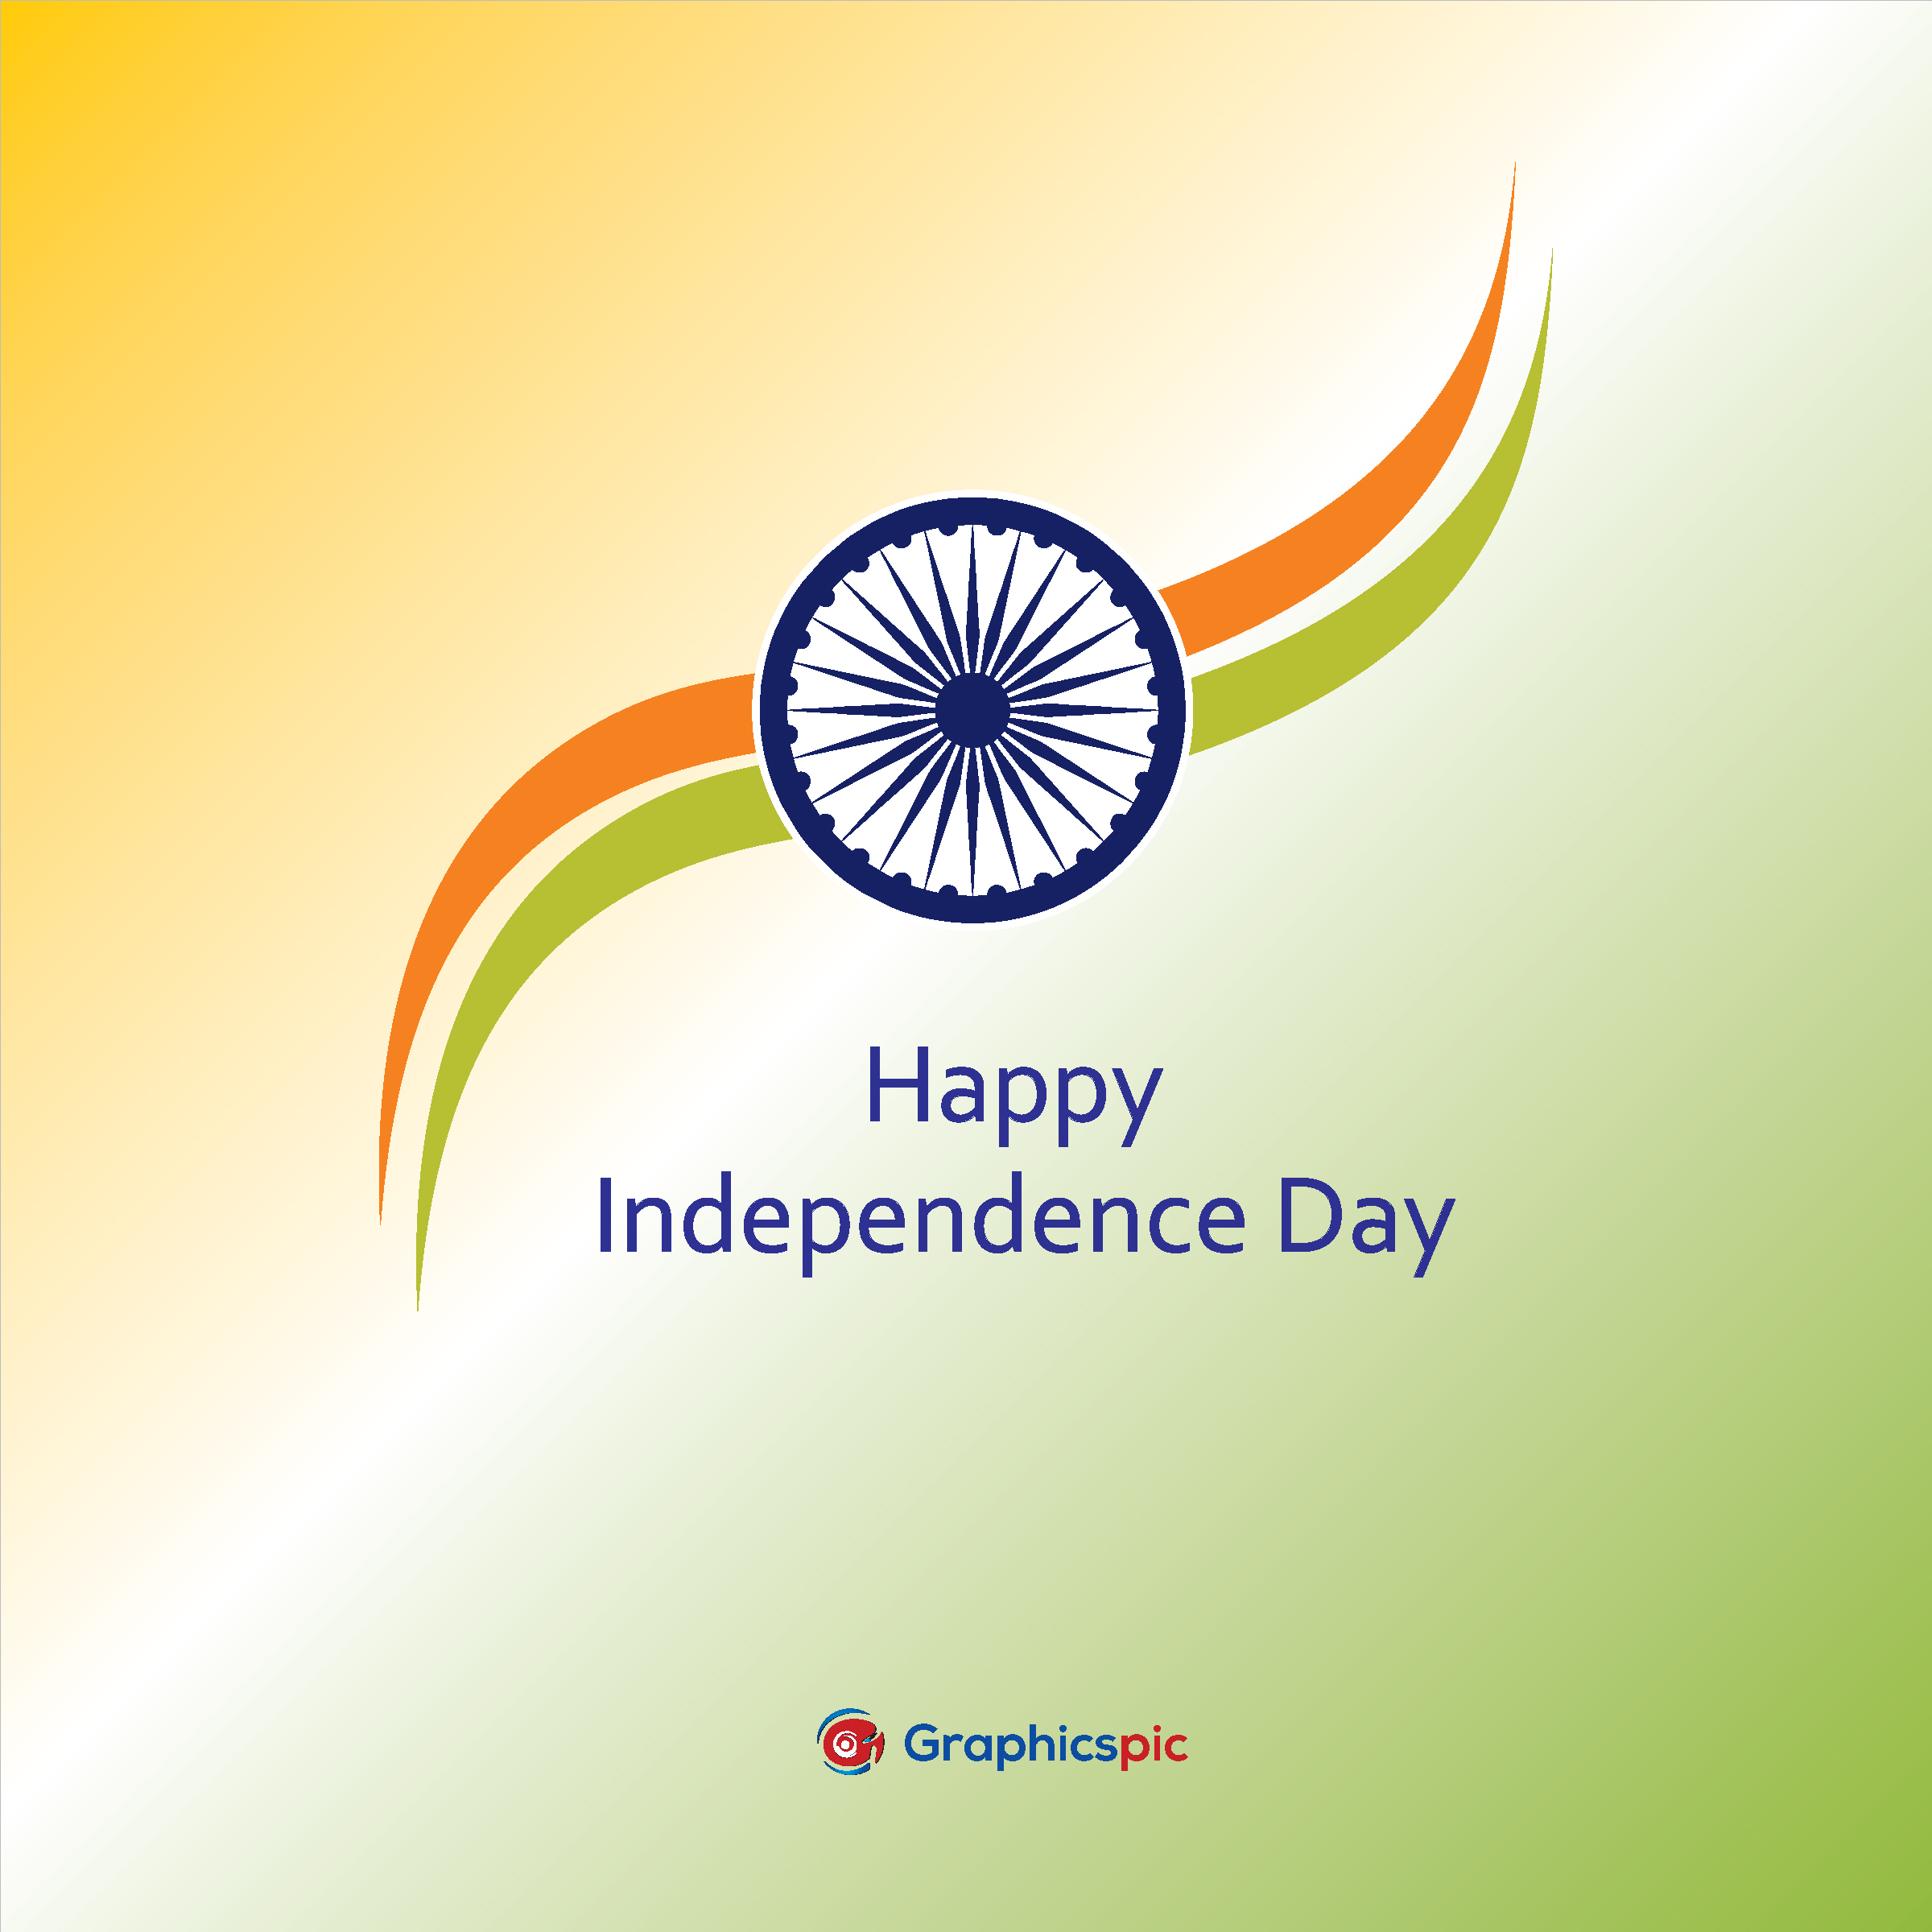 15th august, celebrate happy independence day of india background image –  Free Vector - Graphics Pic